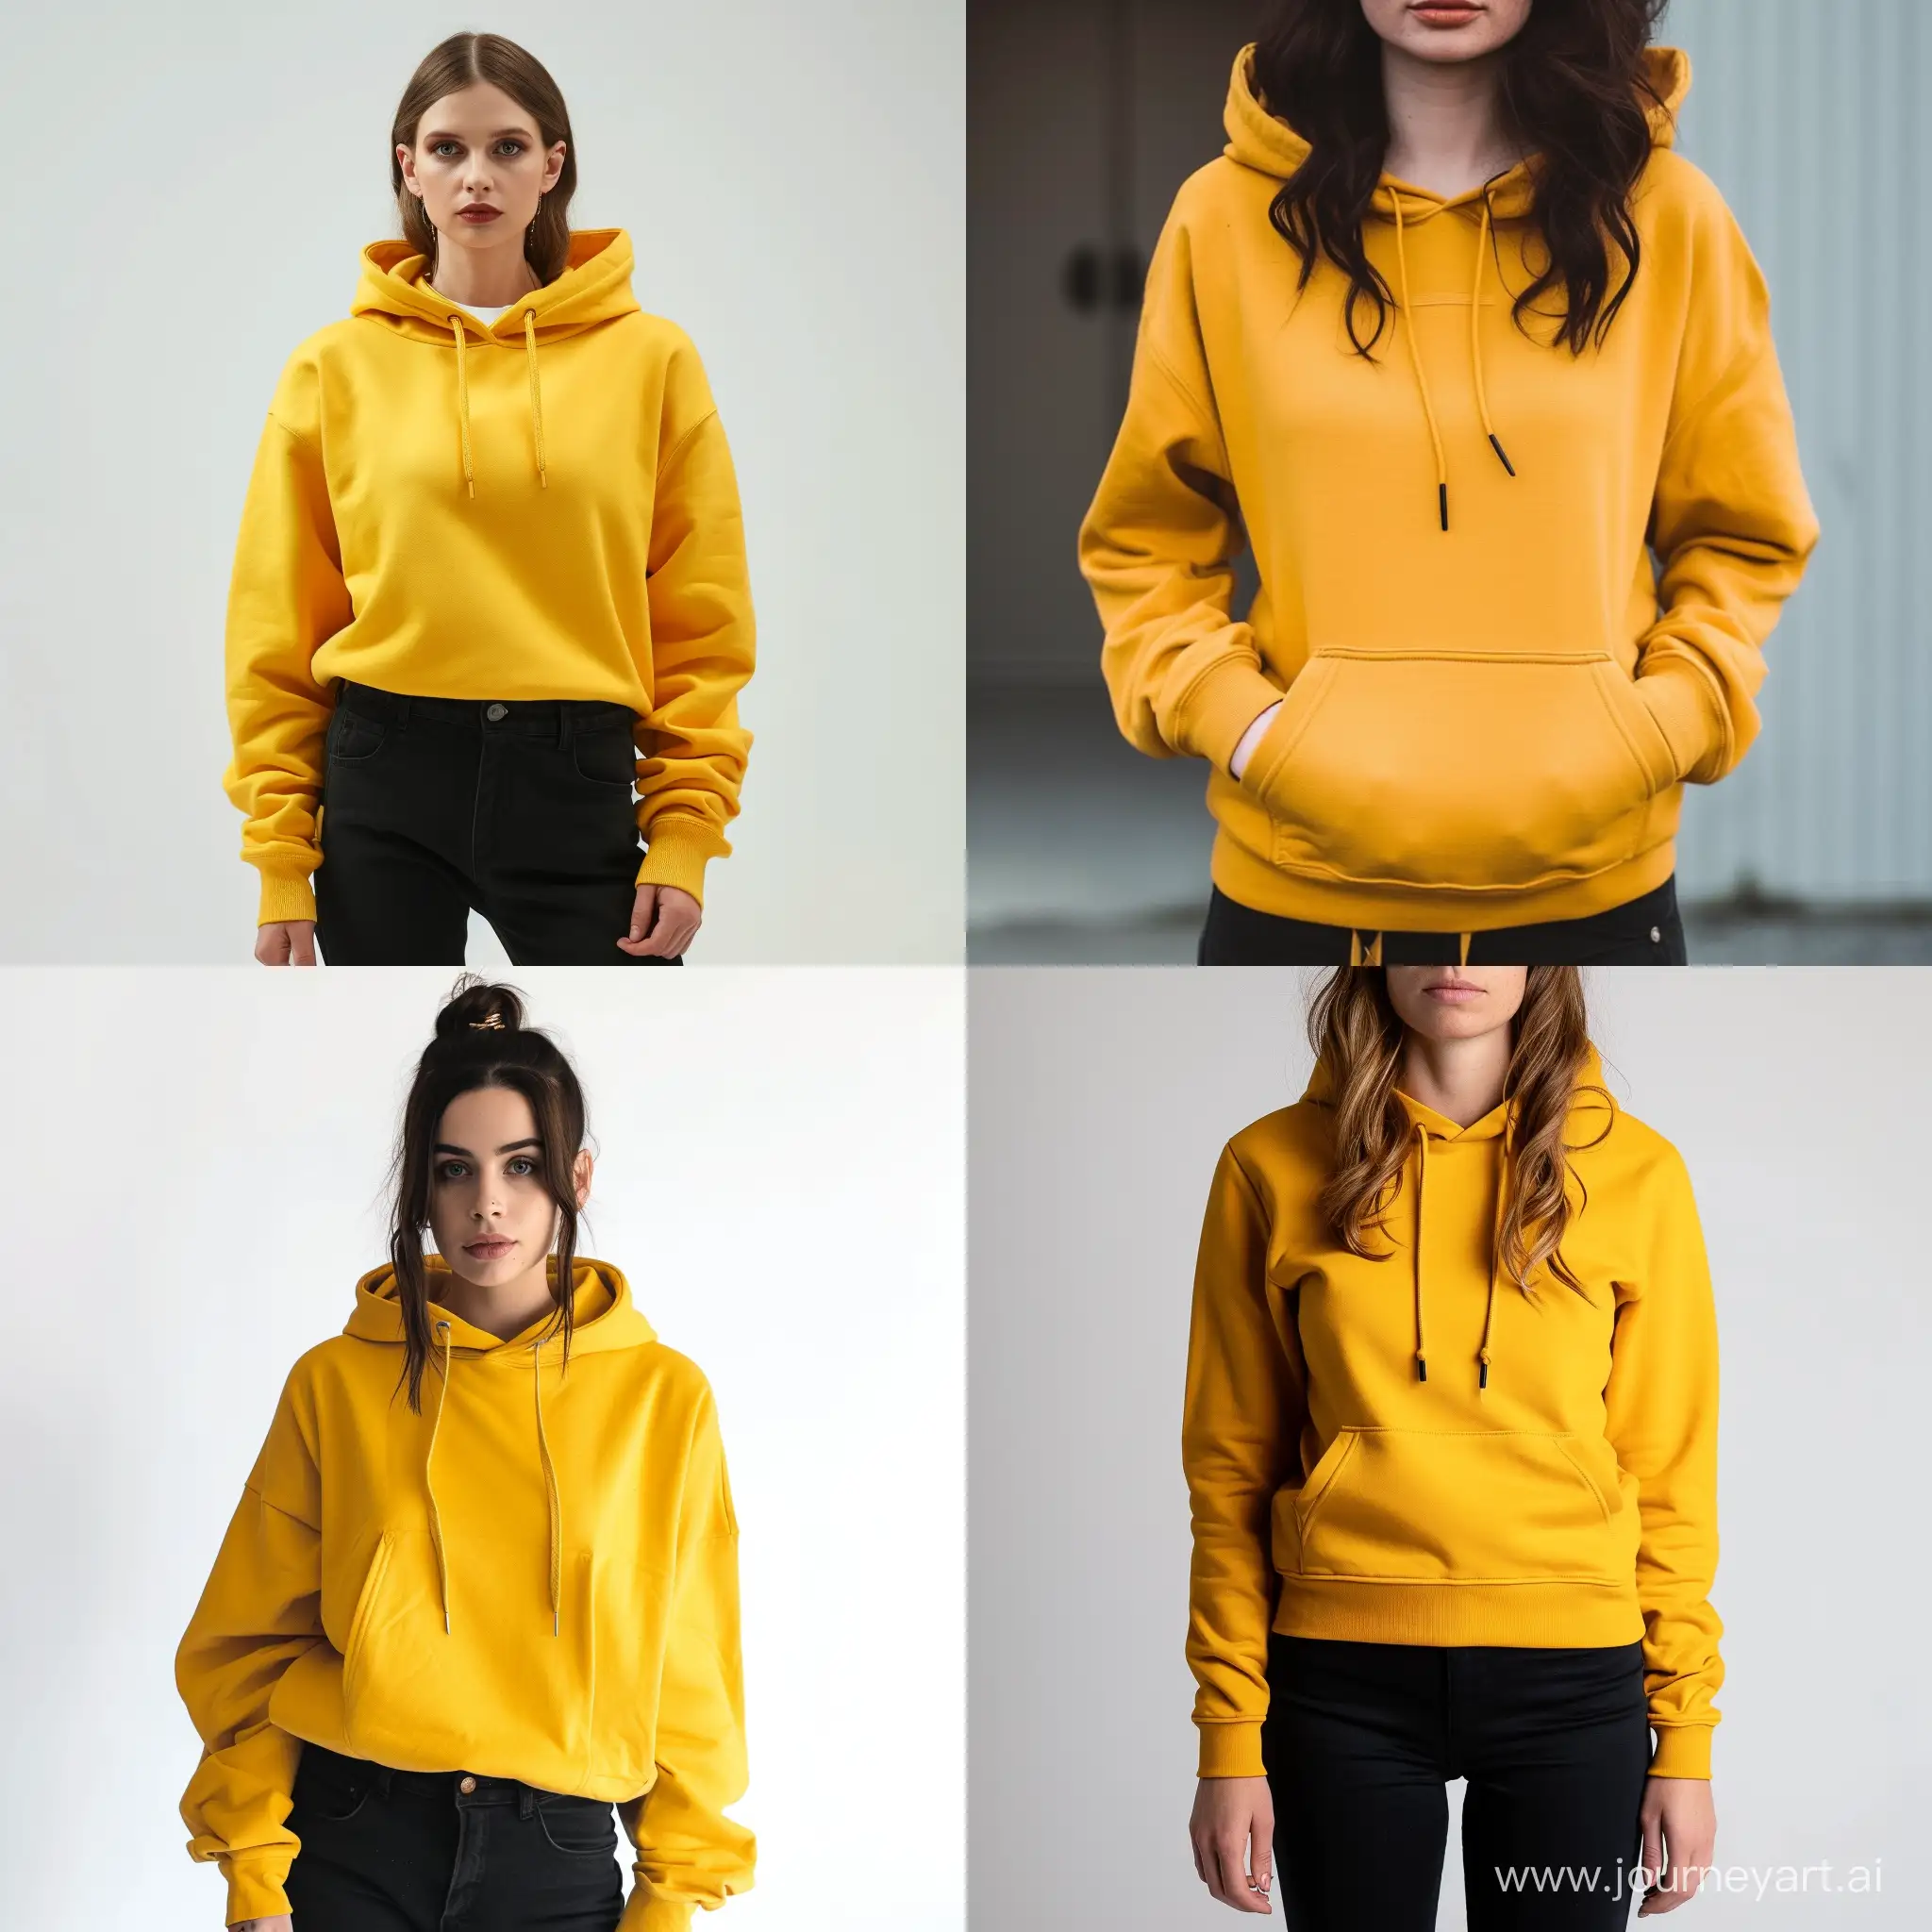 Stylish-Woman-in-Yellow-Hoodie-and-Black-Pants-Fashion-Portrait